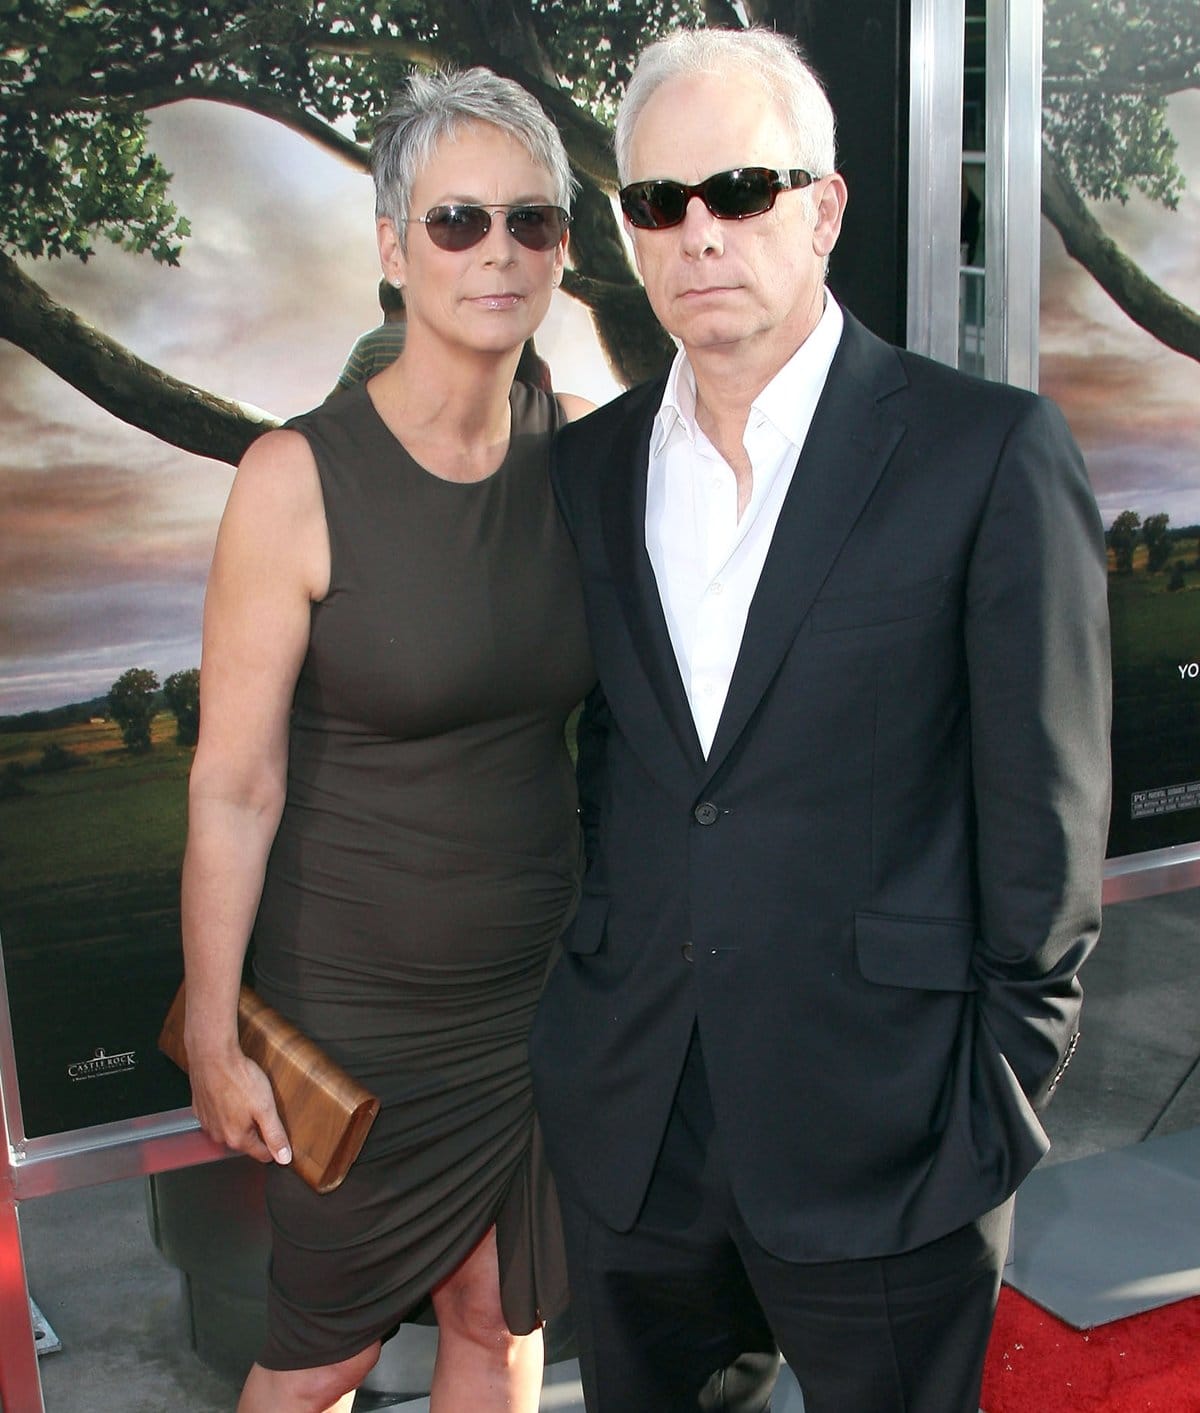 Jamie Lee Curtis and her husband Christopher Guest have been happily married since 1984